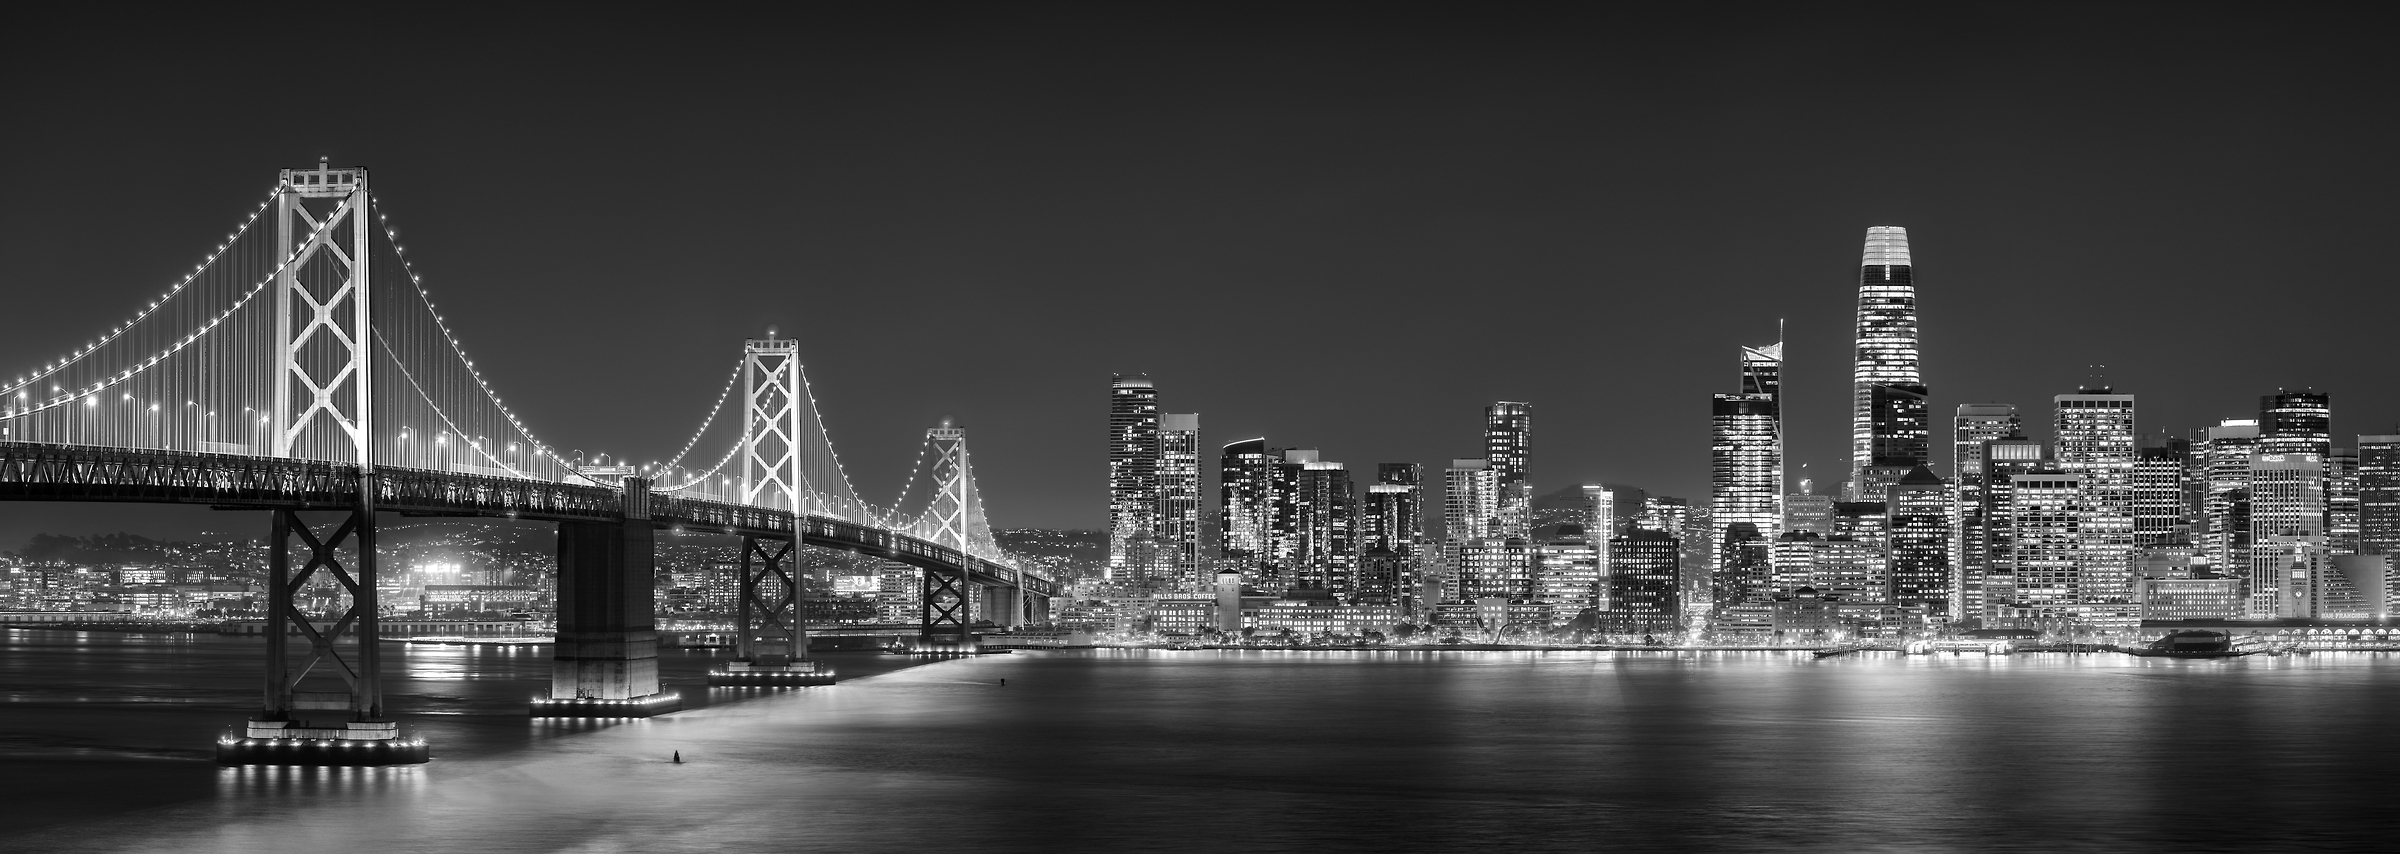 480 megapixels! A very high resolution, large-format VAST photo print of the San Francisco skyline and Bay Bridge at night; black & white cityscape skyline photograph created by Jim Tarpo in Yerba Buena Island and Treasure Island, San Francisco, California.